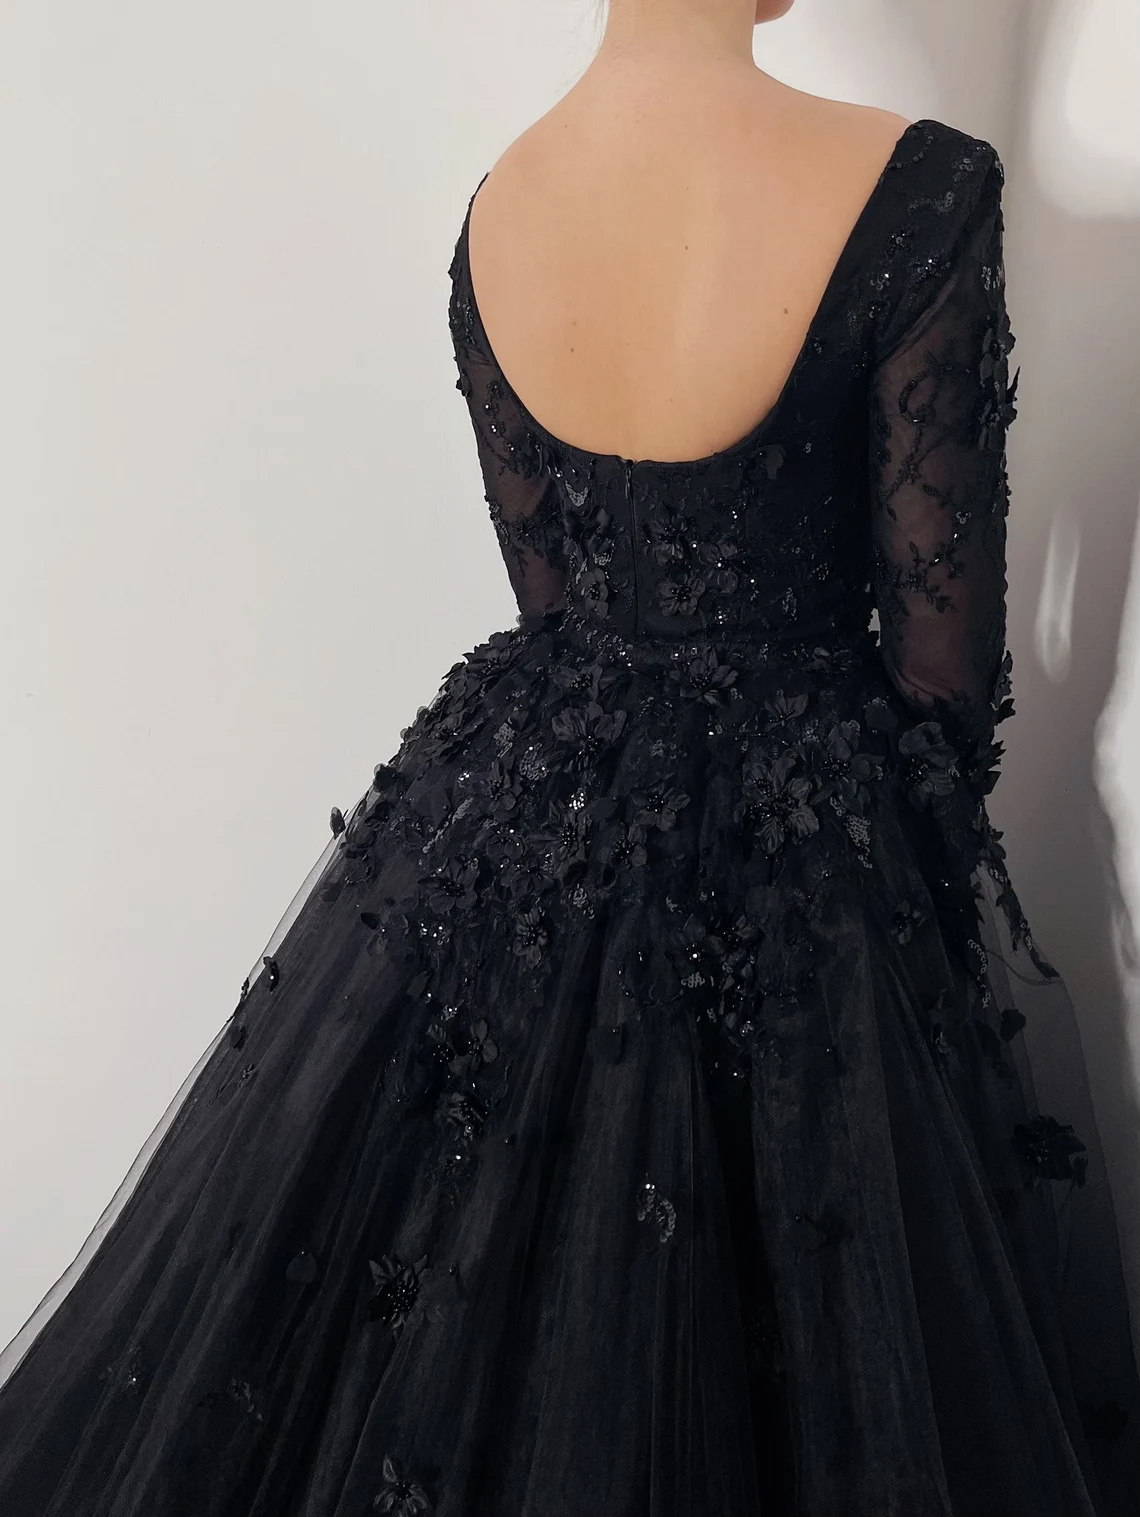 Black Gothic elegant 3D floral beaded wedding dress, open back train tulle gown,DS9580